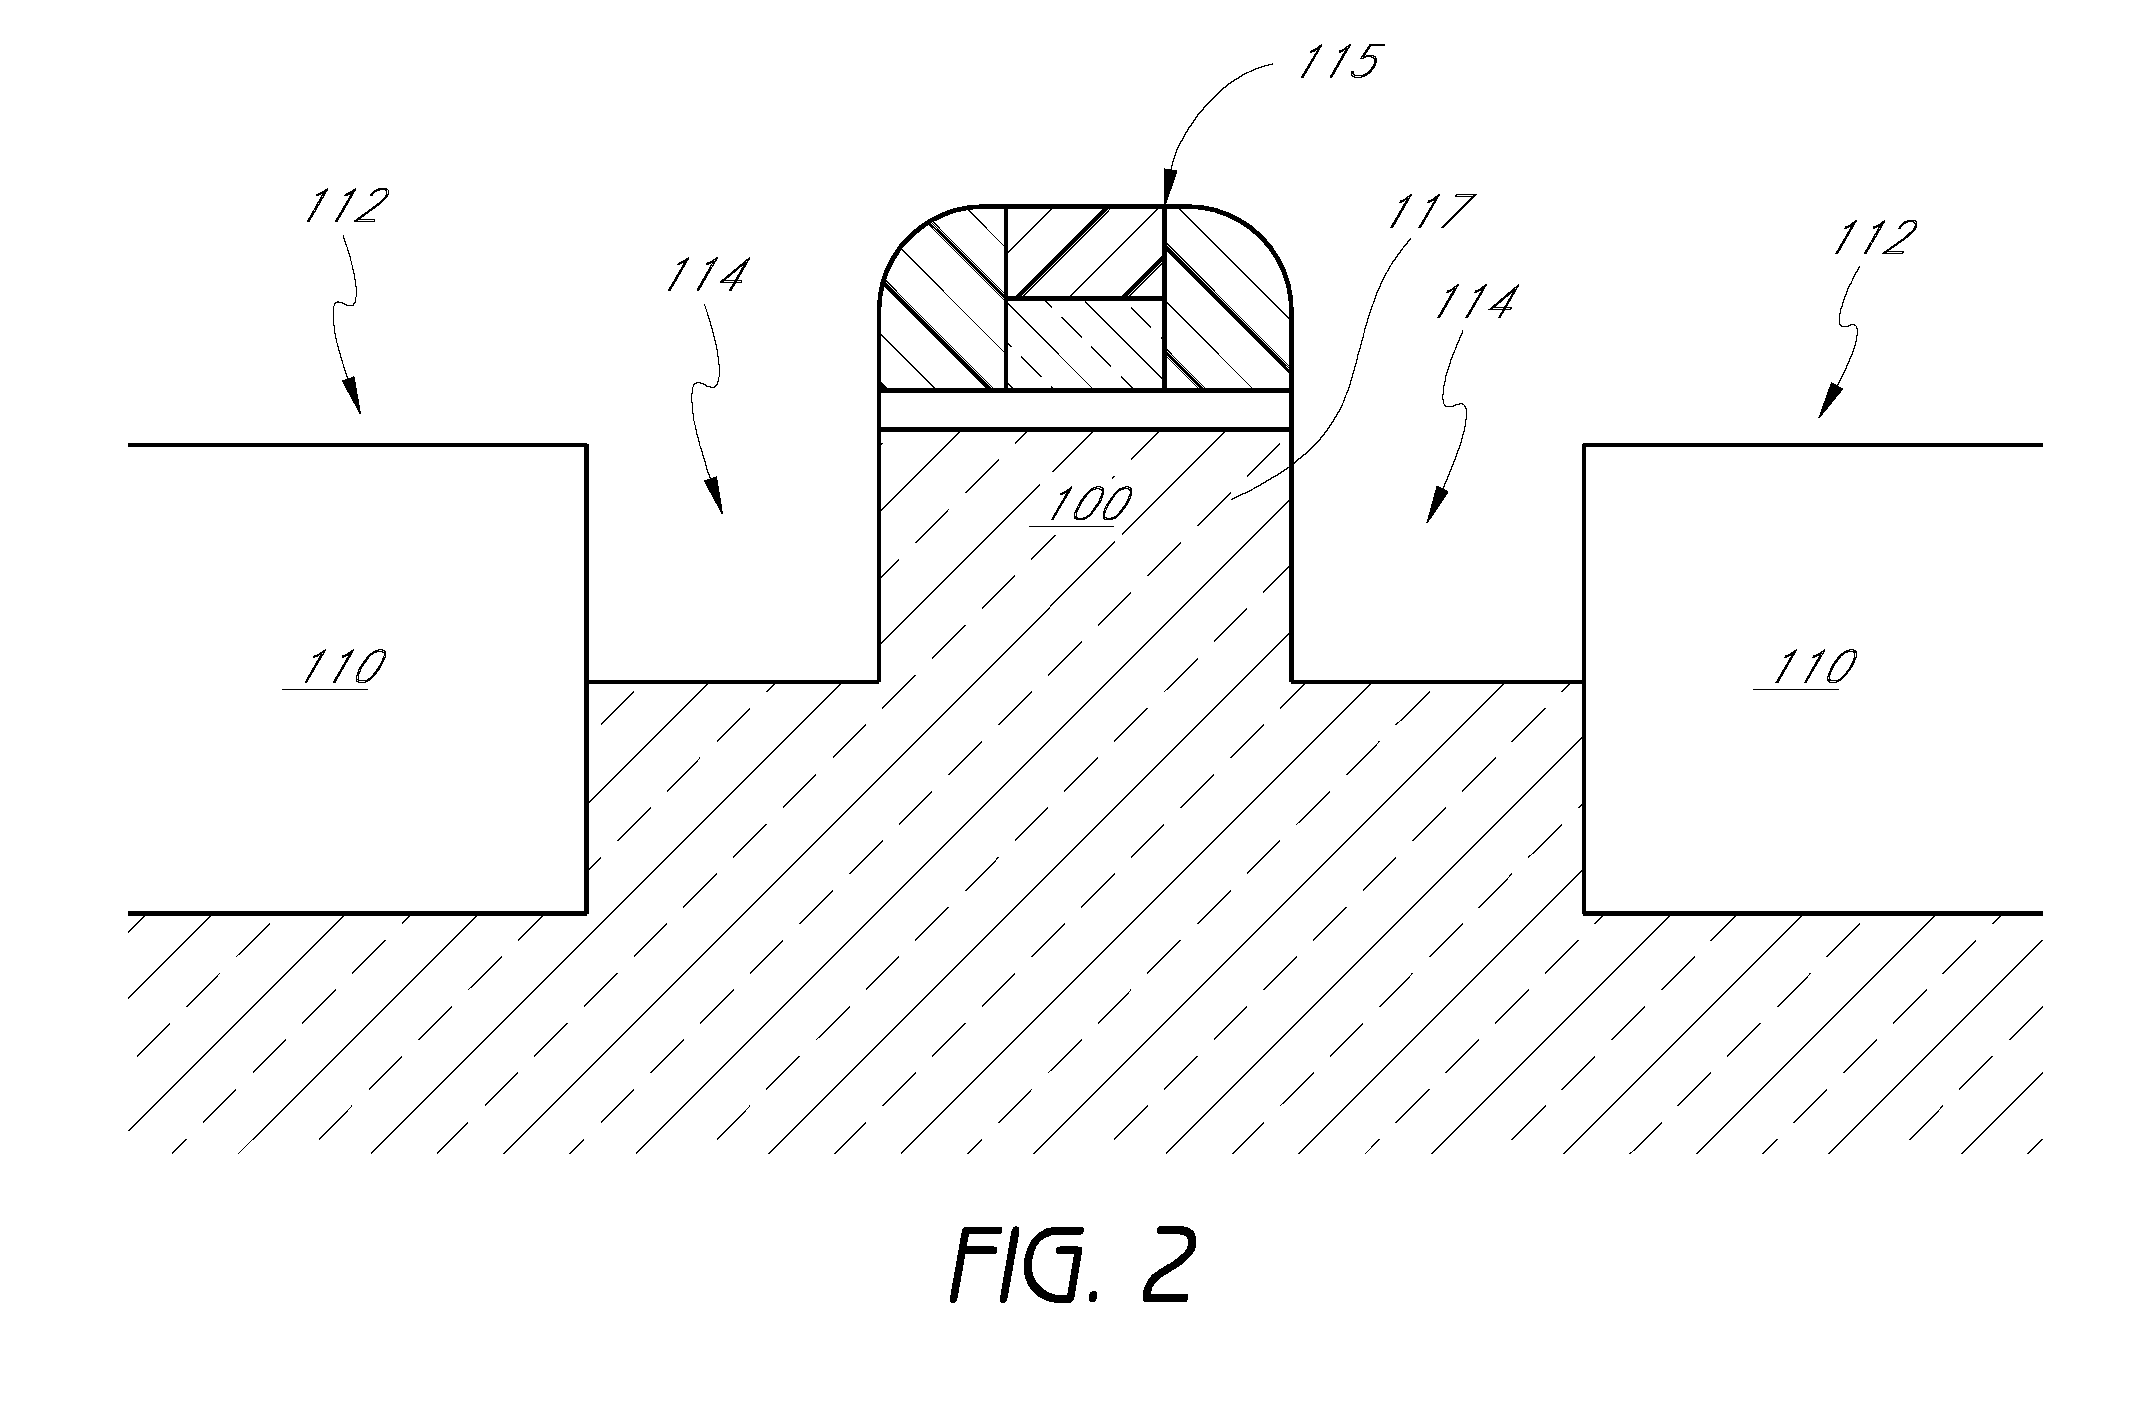 Selective epitaxial formation of semiconductor films